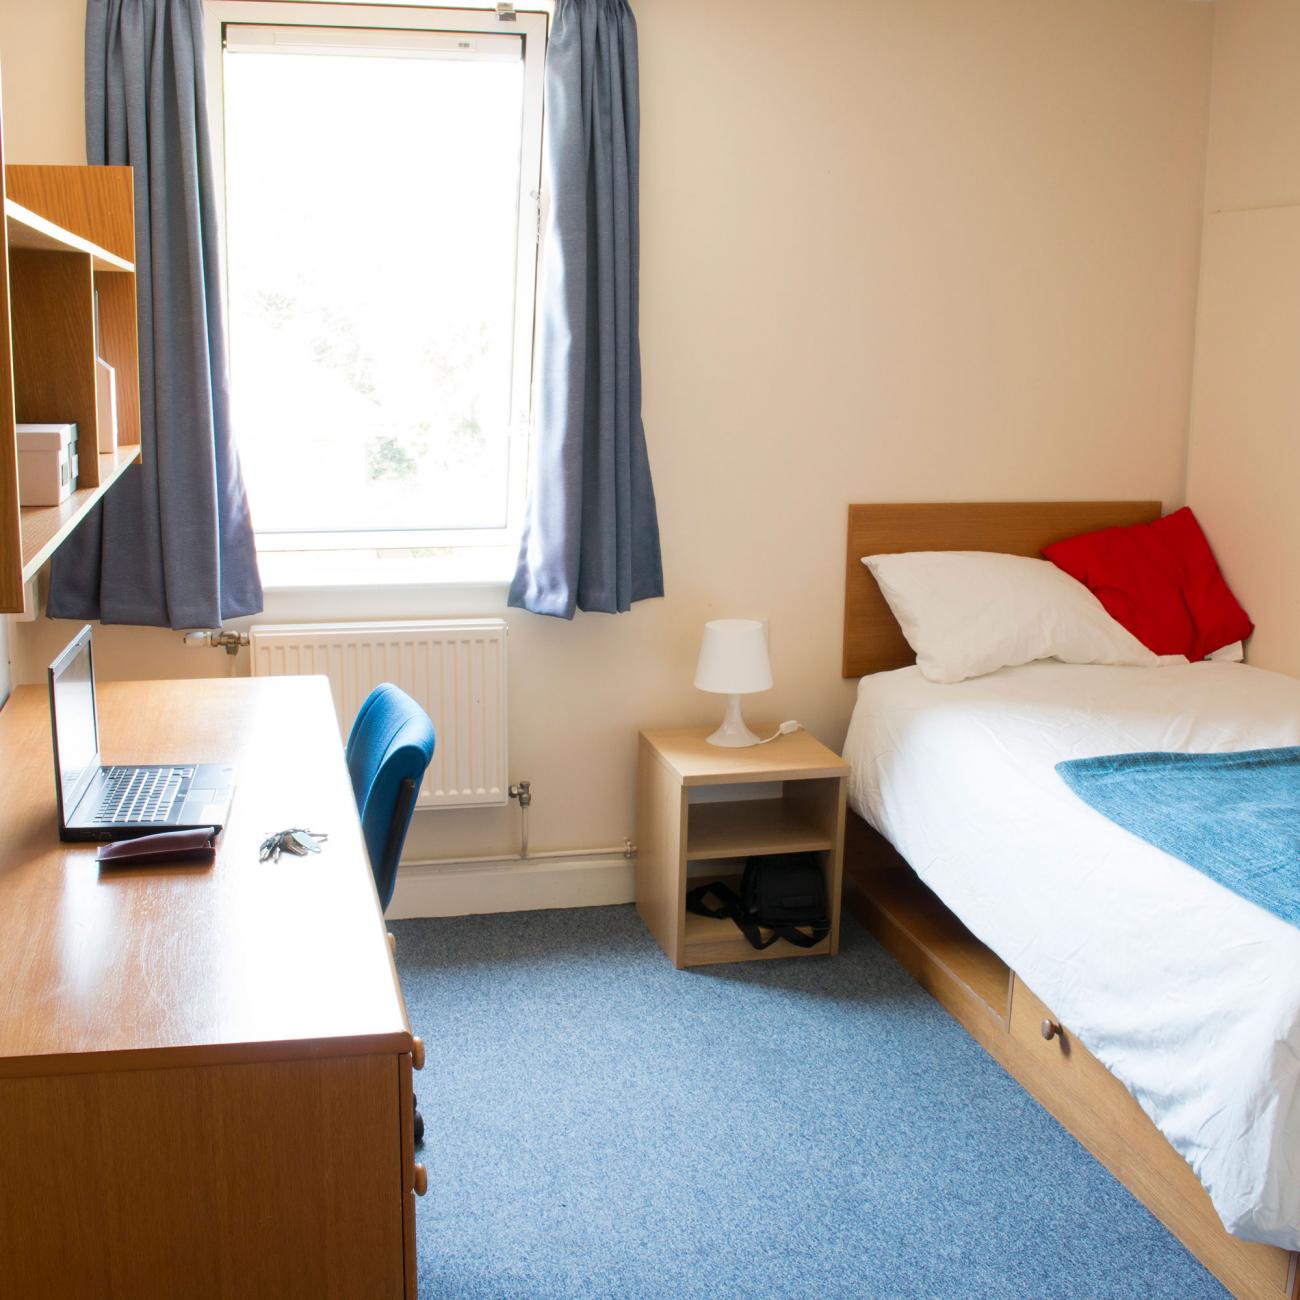 A student bedroom. A section of blue carpet separates a single bed with patterned sheets and a large wooden desk. A window on the rear wall lets light in.